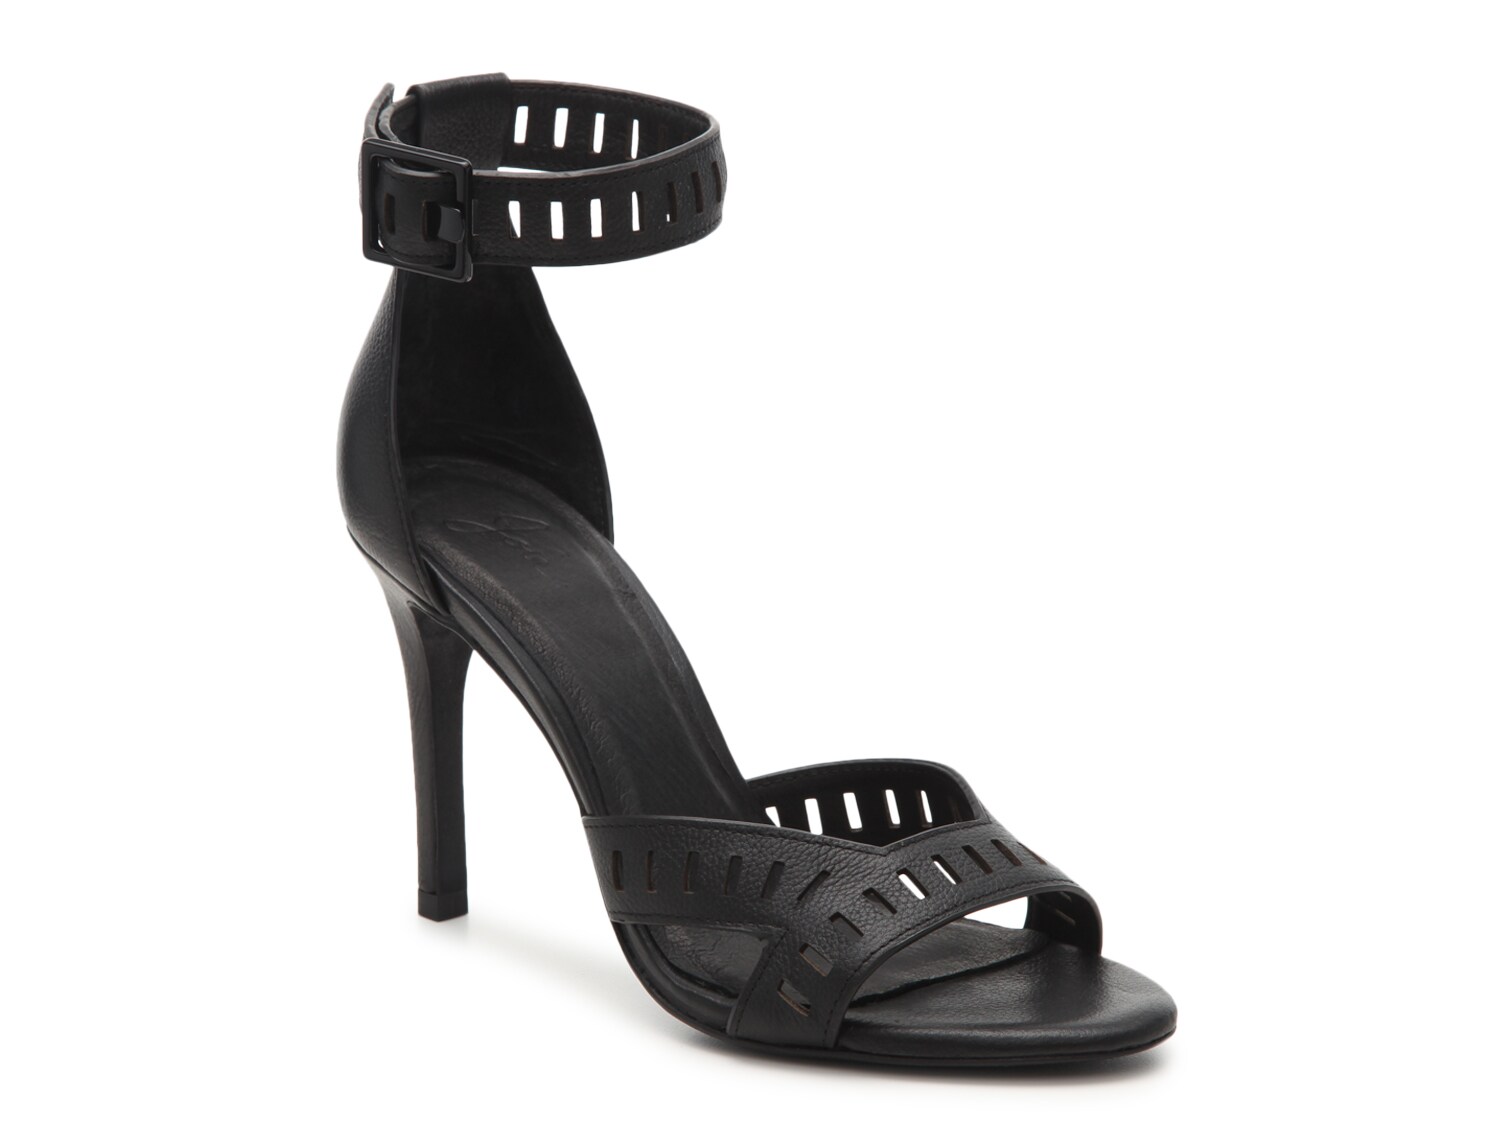 Joie Airlie Sandal - Free Shipping | DSW